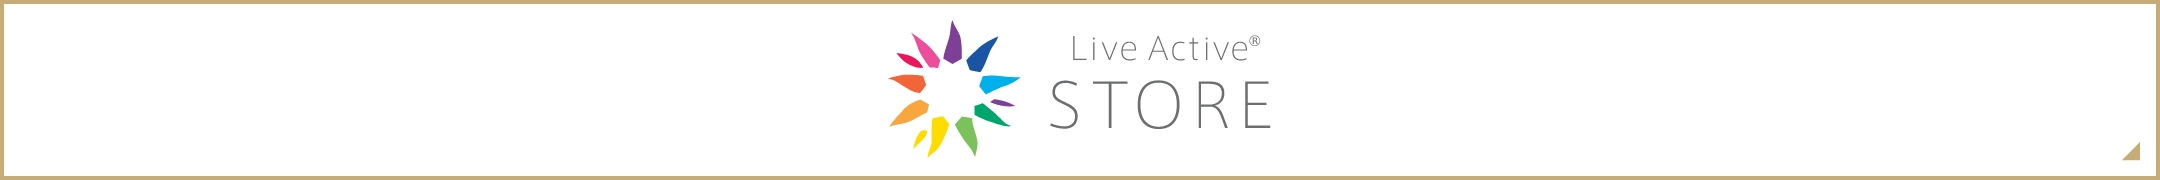 Live Active Store